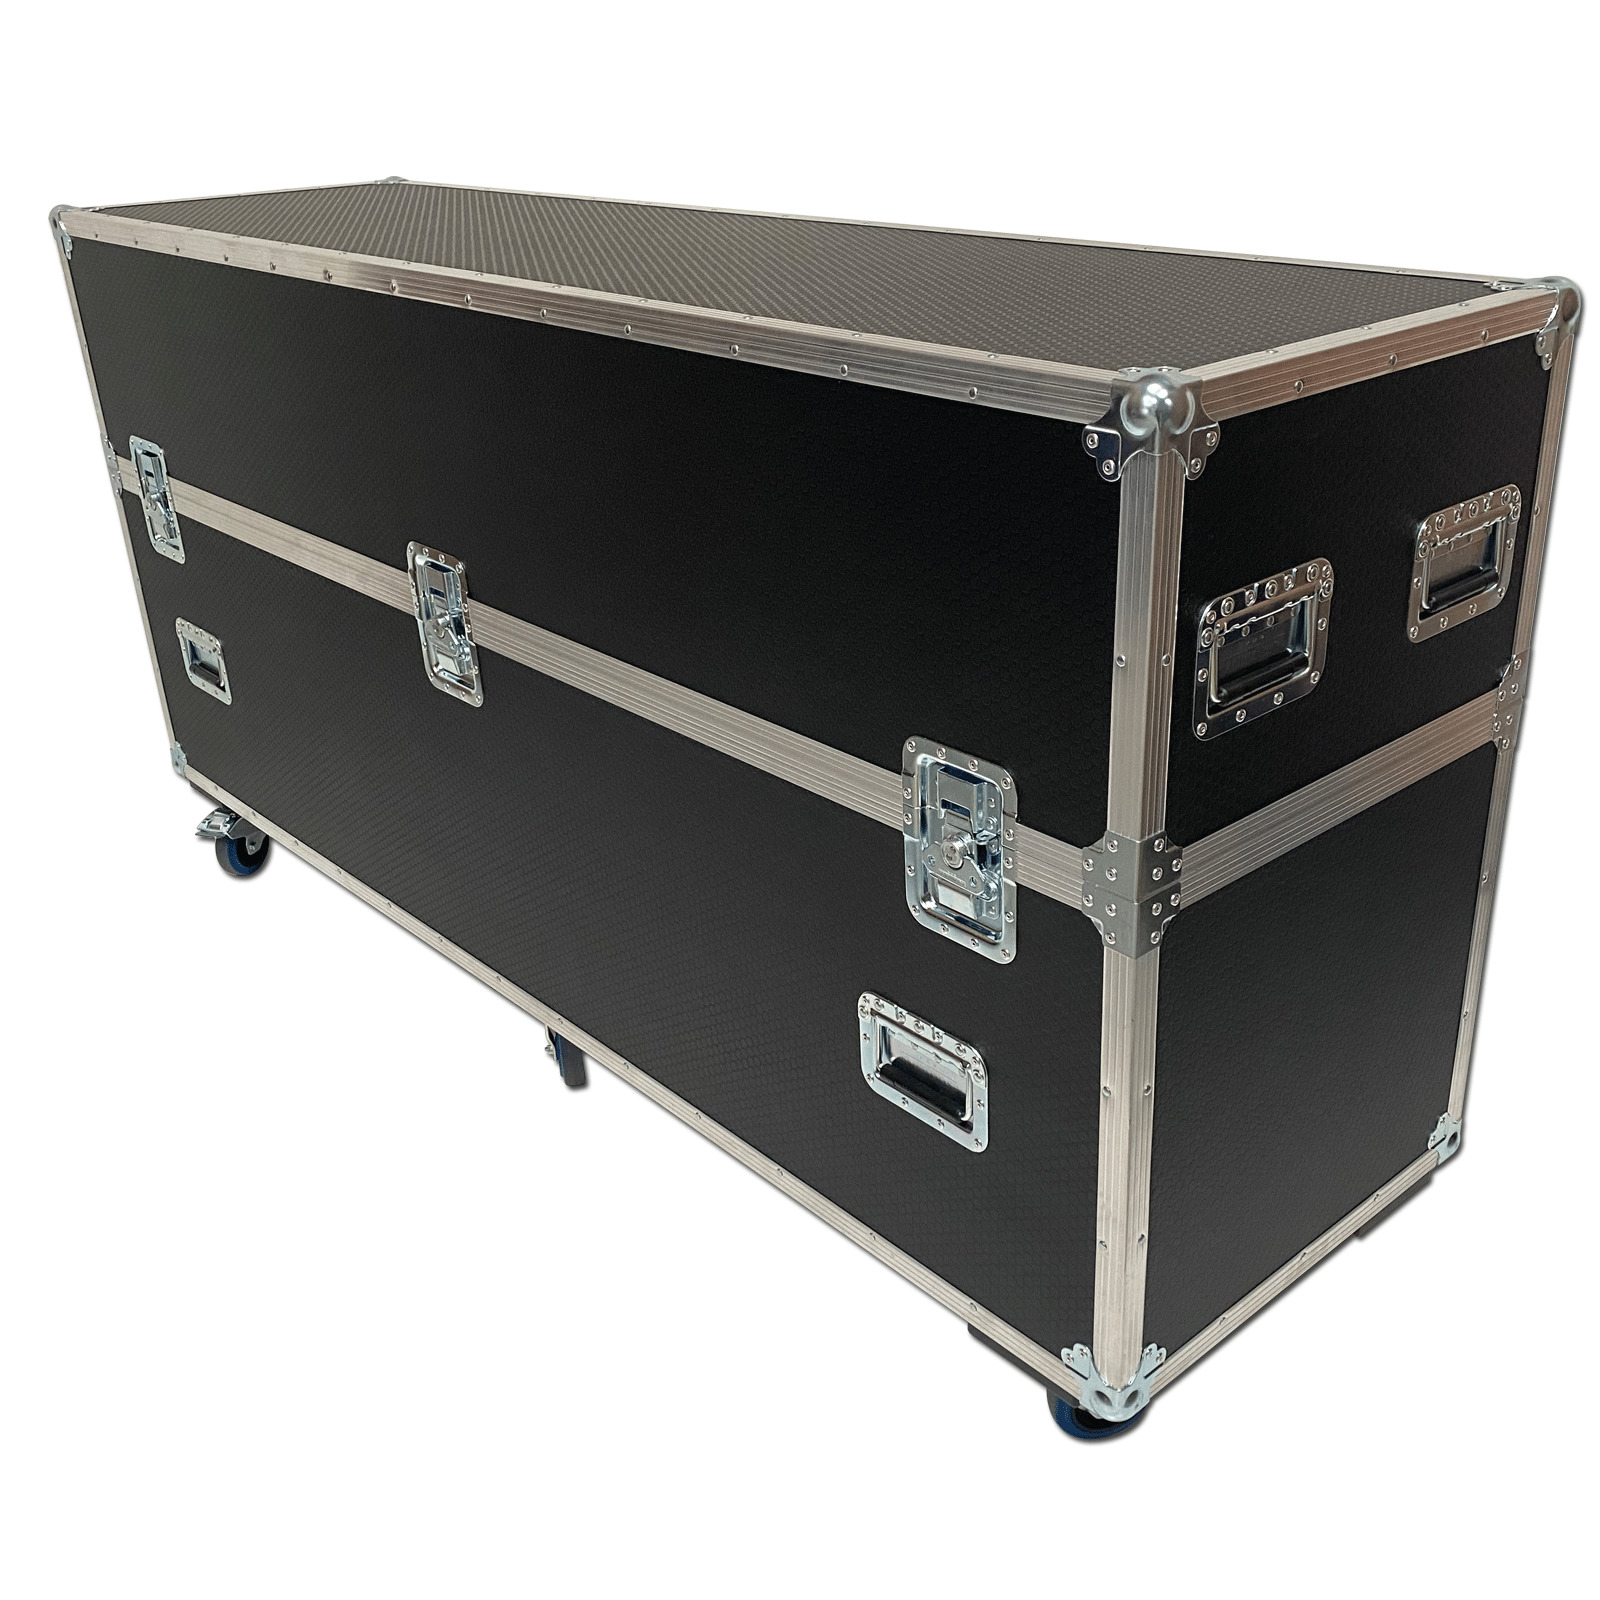 50 Digital Signage Totem Flight Case for Dsign 50 Freestanding 10 Point Touch Screen Display 